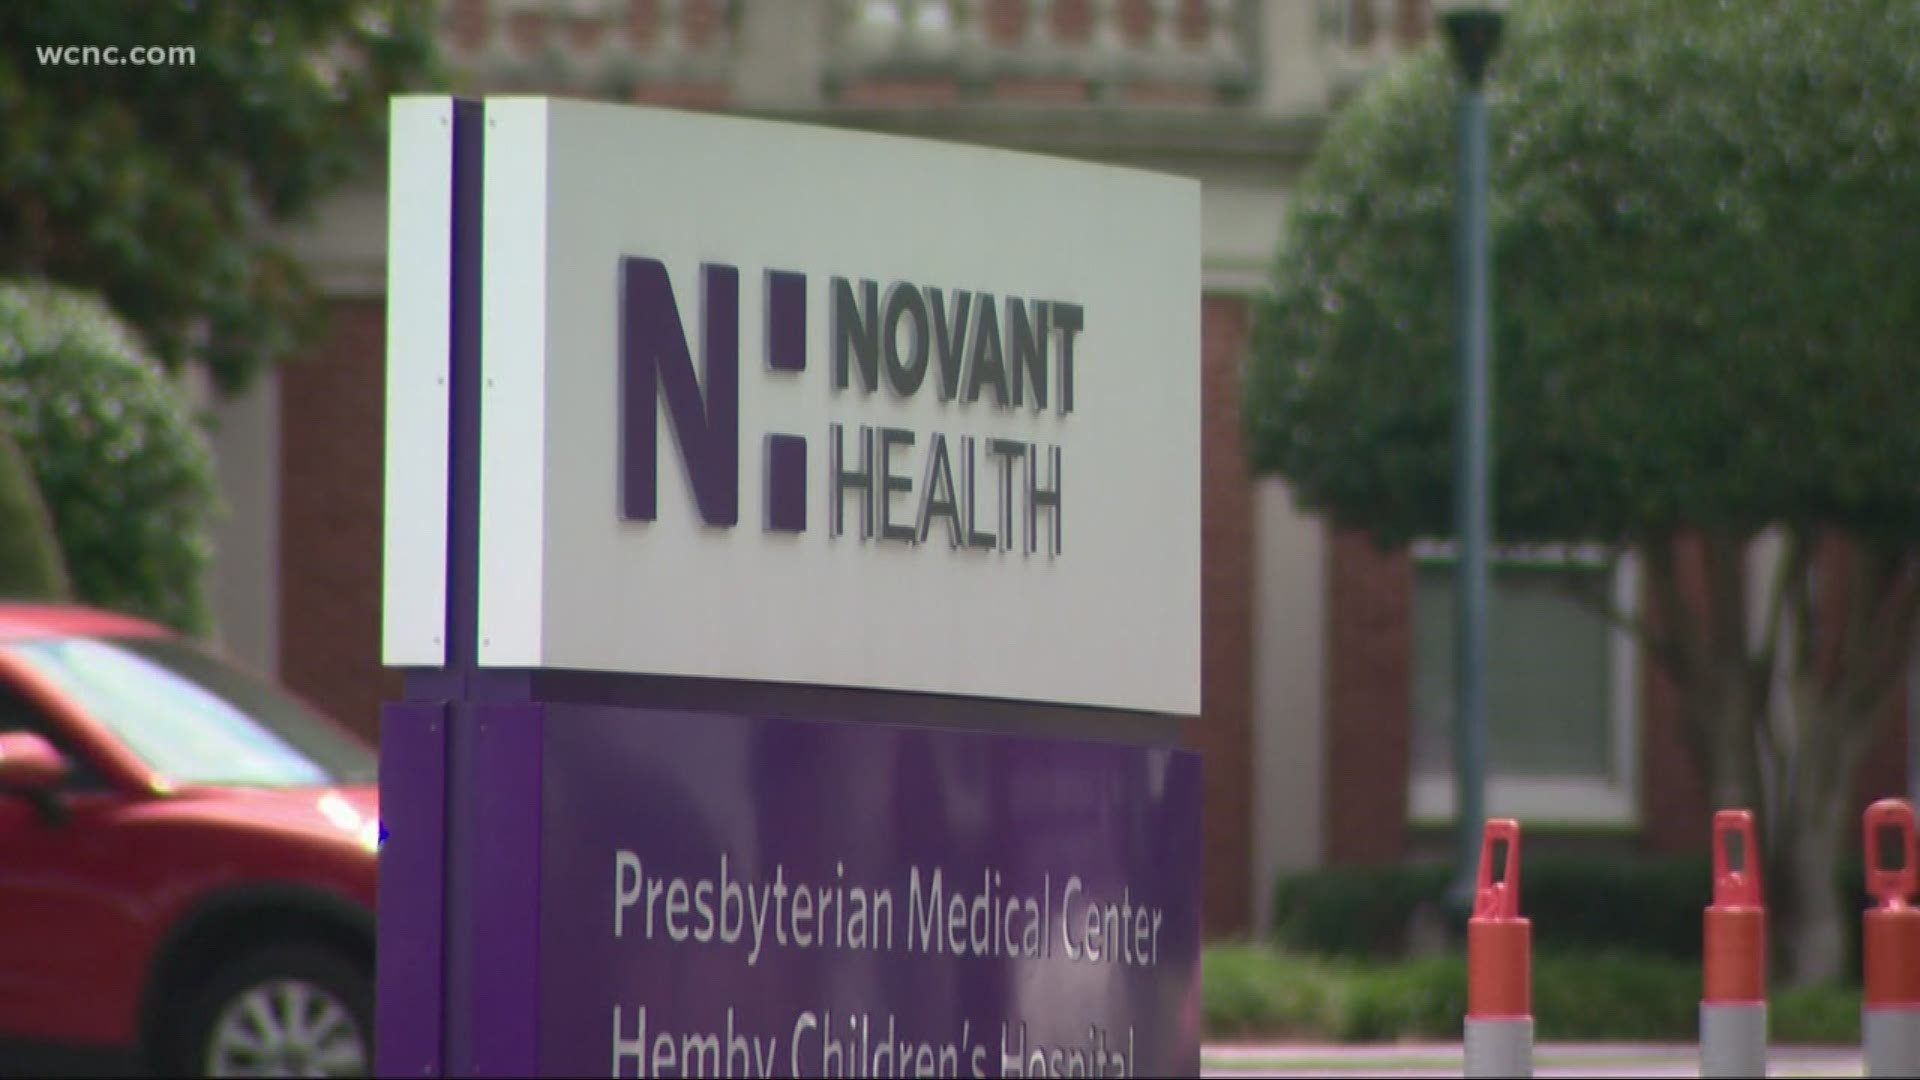 Novant Health Chief Safety and Quality Officer Dr. David Priest said the health system is asking its team members “to be good stewards” of supplies.